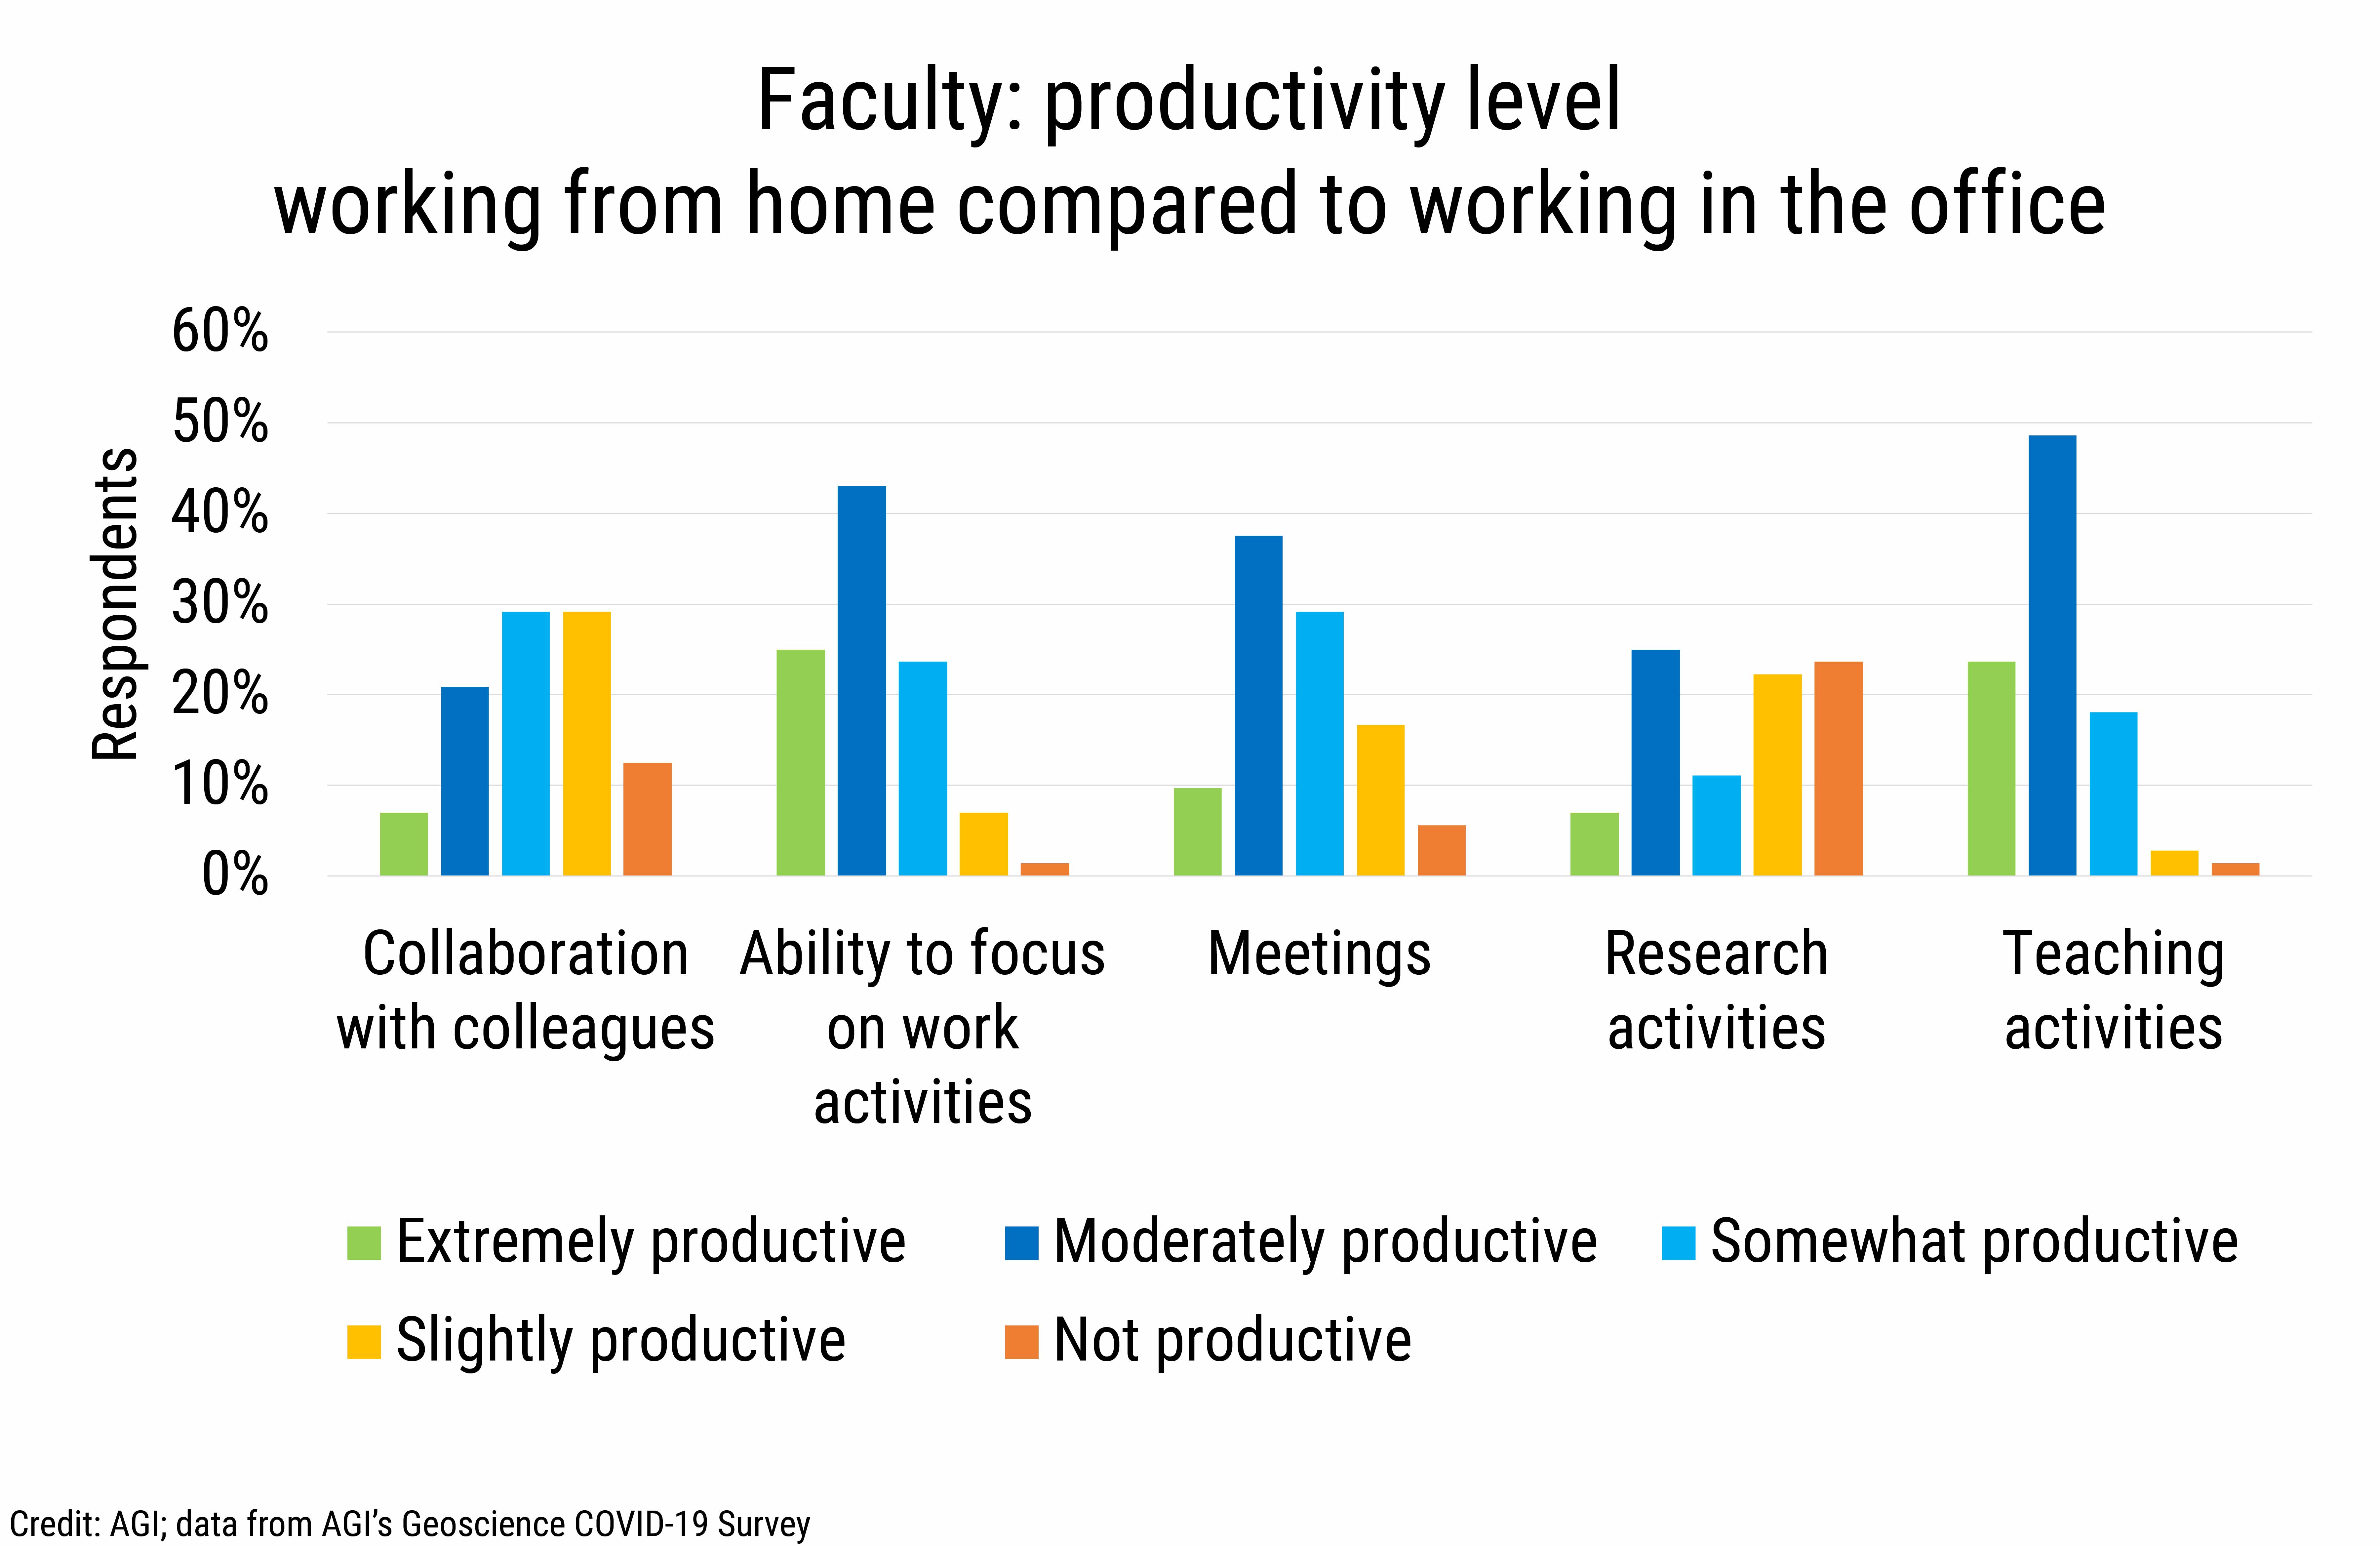 DB_2020-031 chart11 Faculty productivity level working from home compared to working in the office (Credit: AGI; data from AGI's Geoscience COVID-19 Survey)